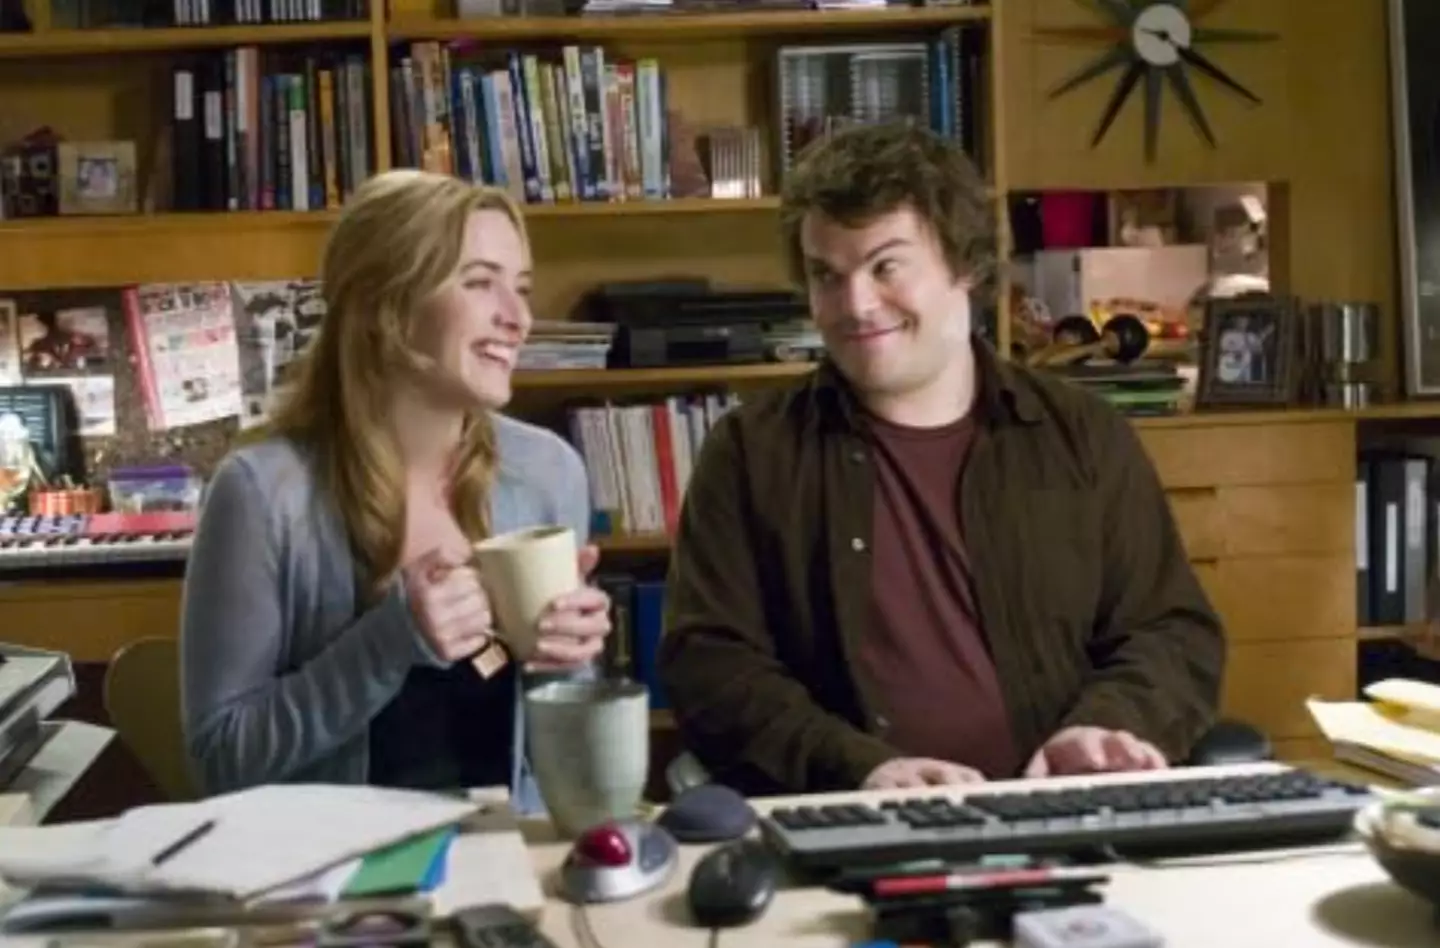 Kate Winslet and Jack Black also star in the festive classic.